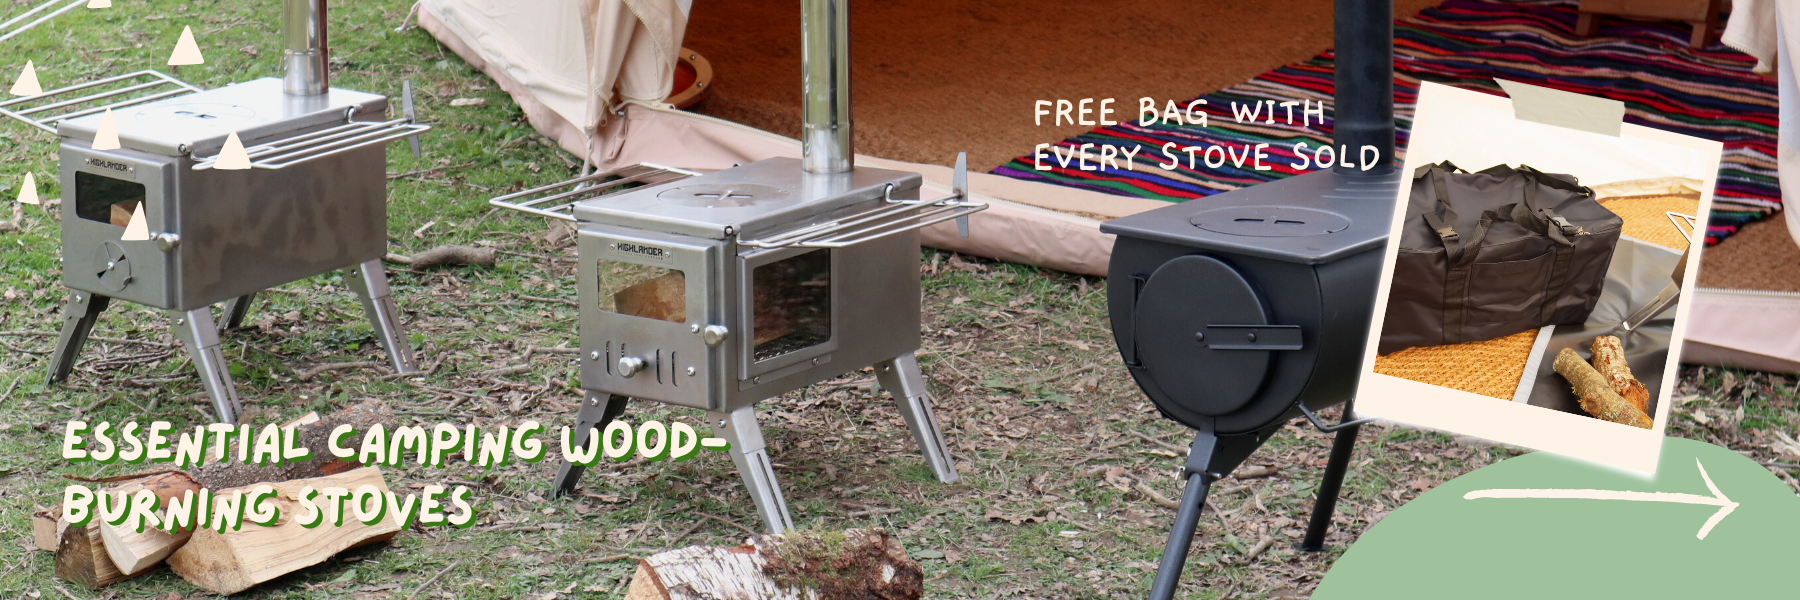 essential camping wood-burning stoves